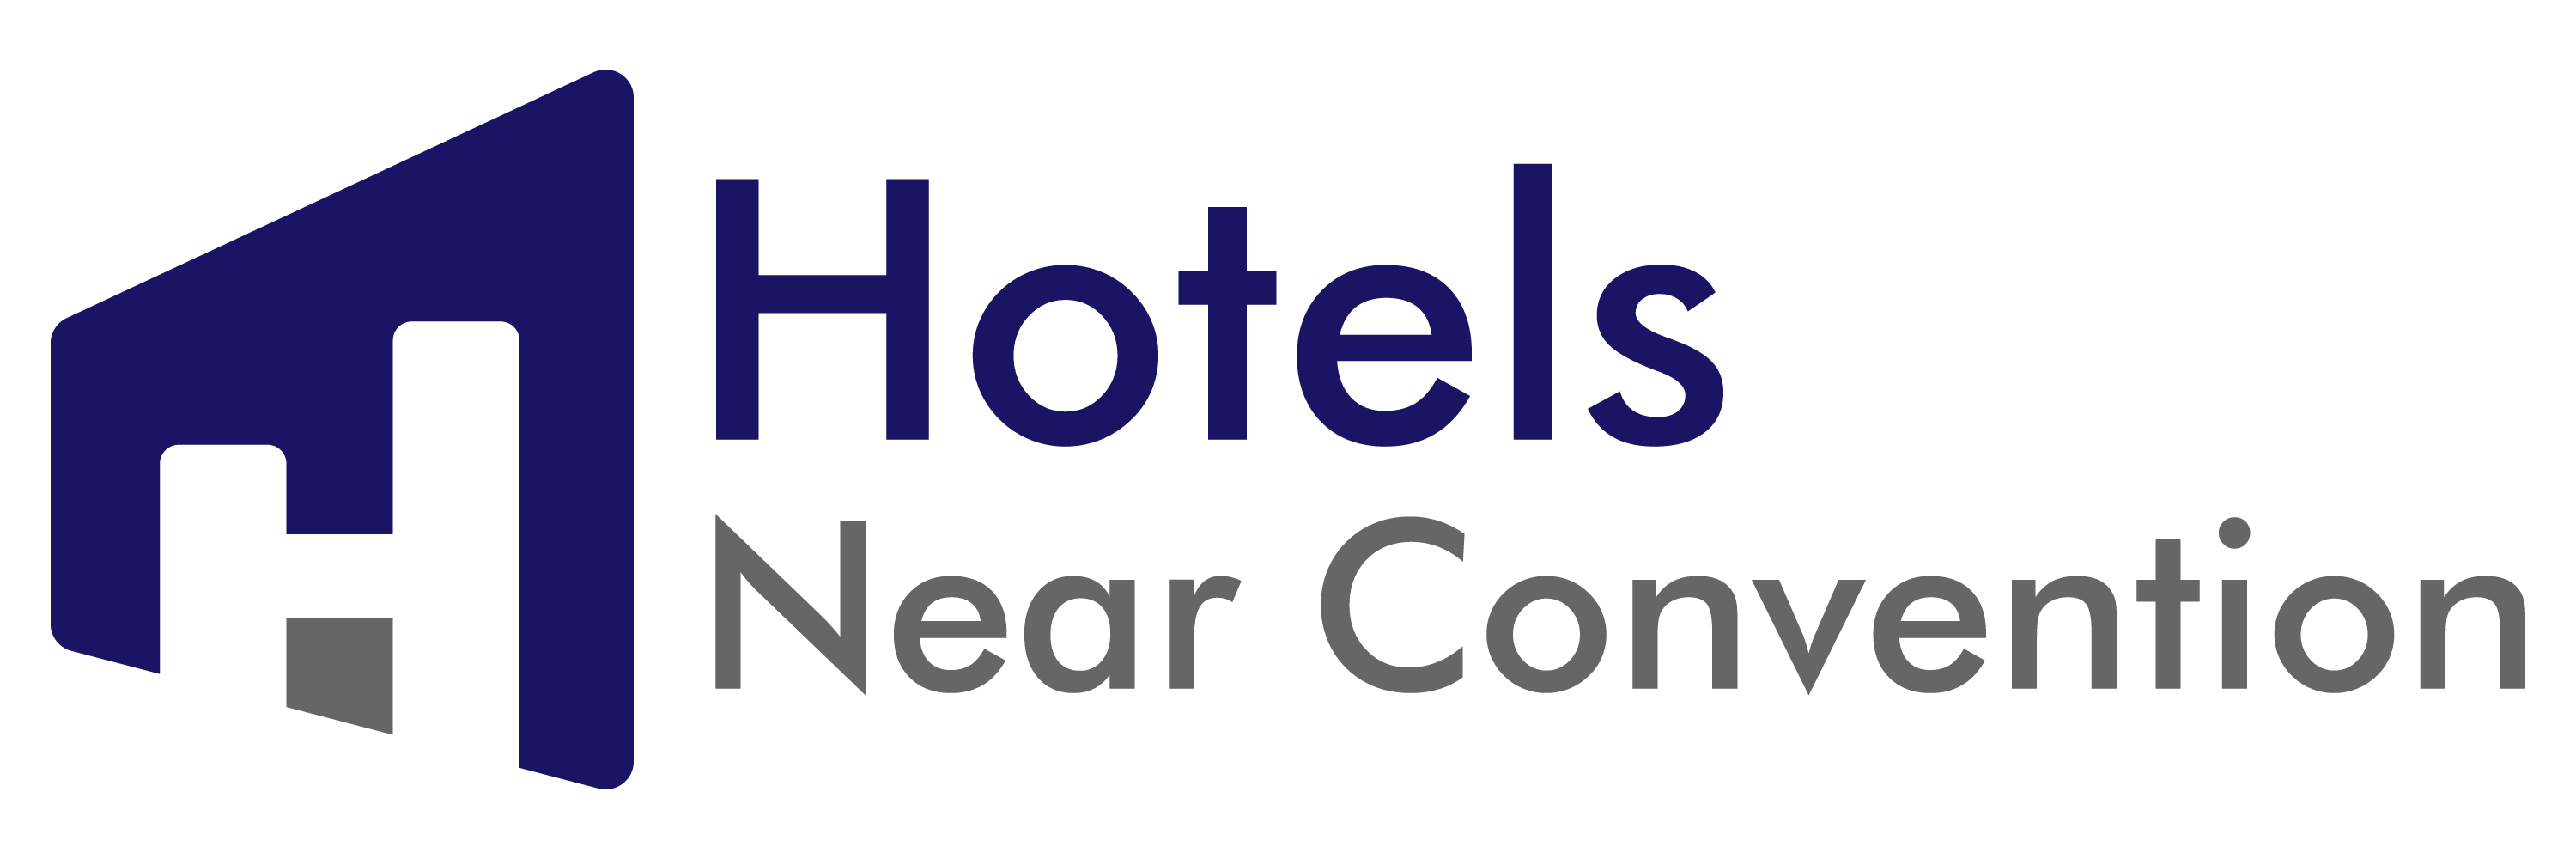 Hotels Near Conventions | InterContinental® Boston - Hotels Near Conventions